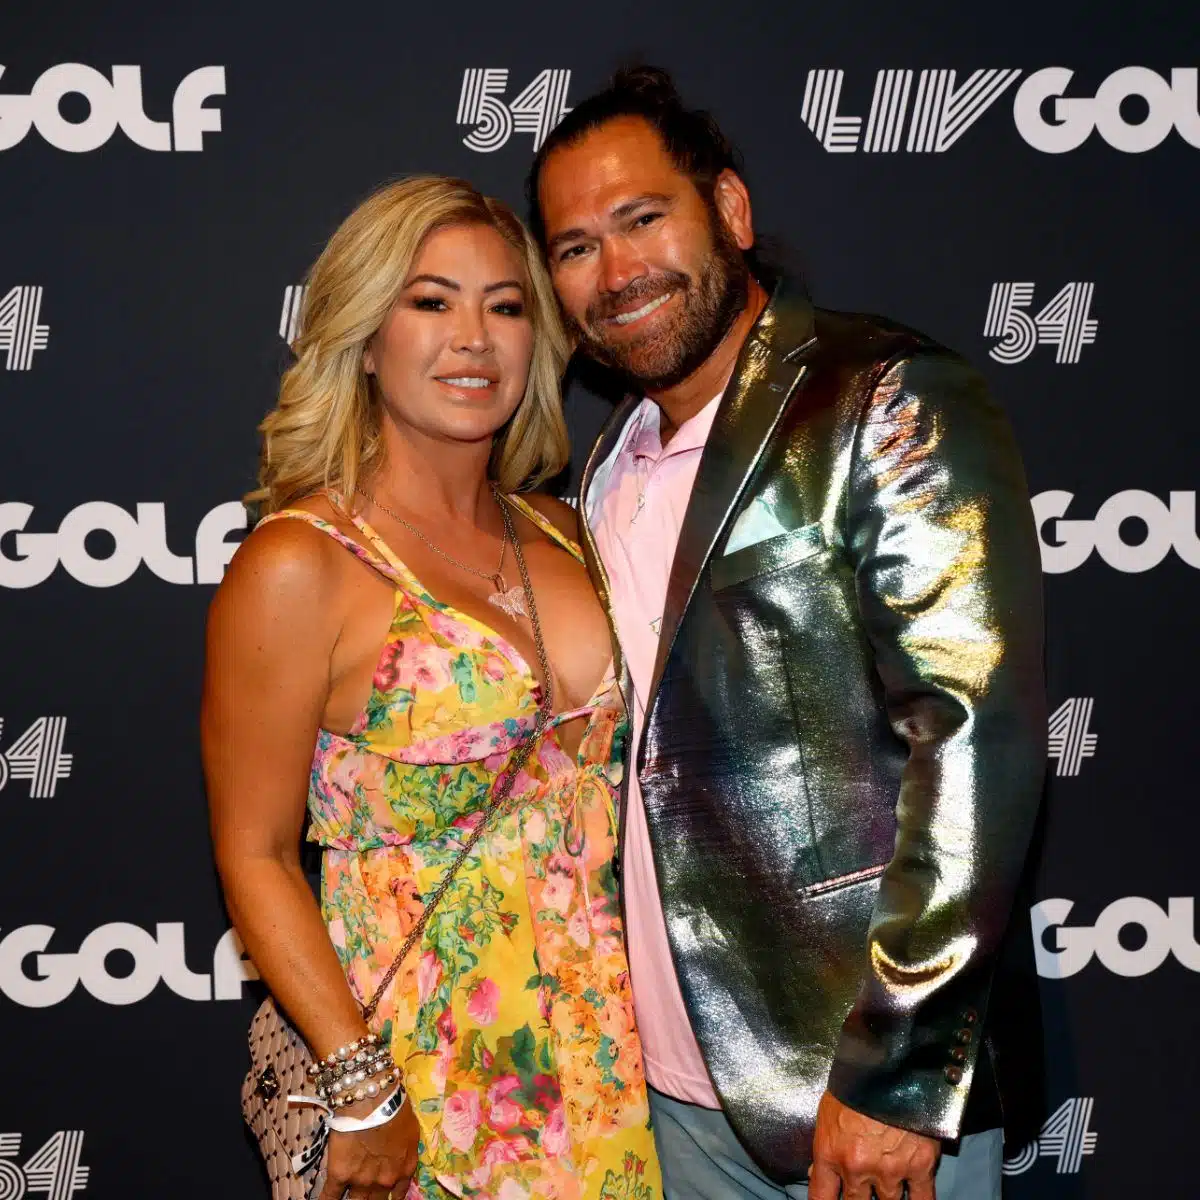 Johnny Damon and wife Michelle Mangan